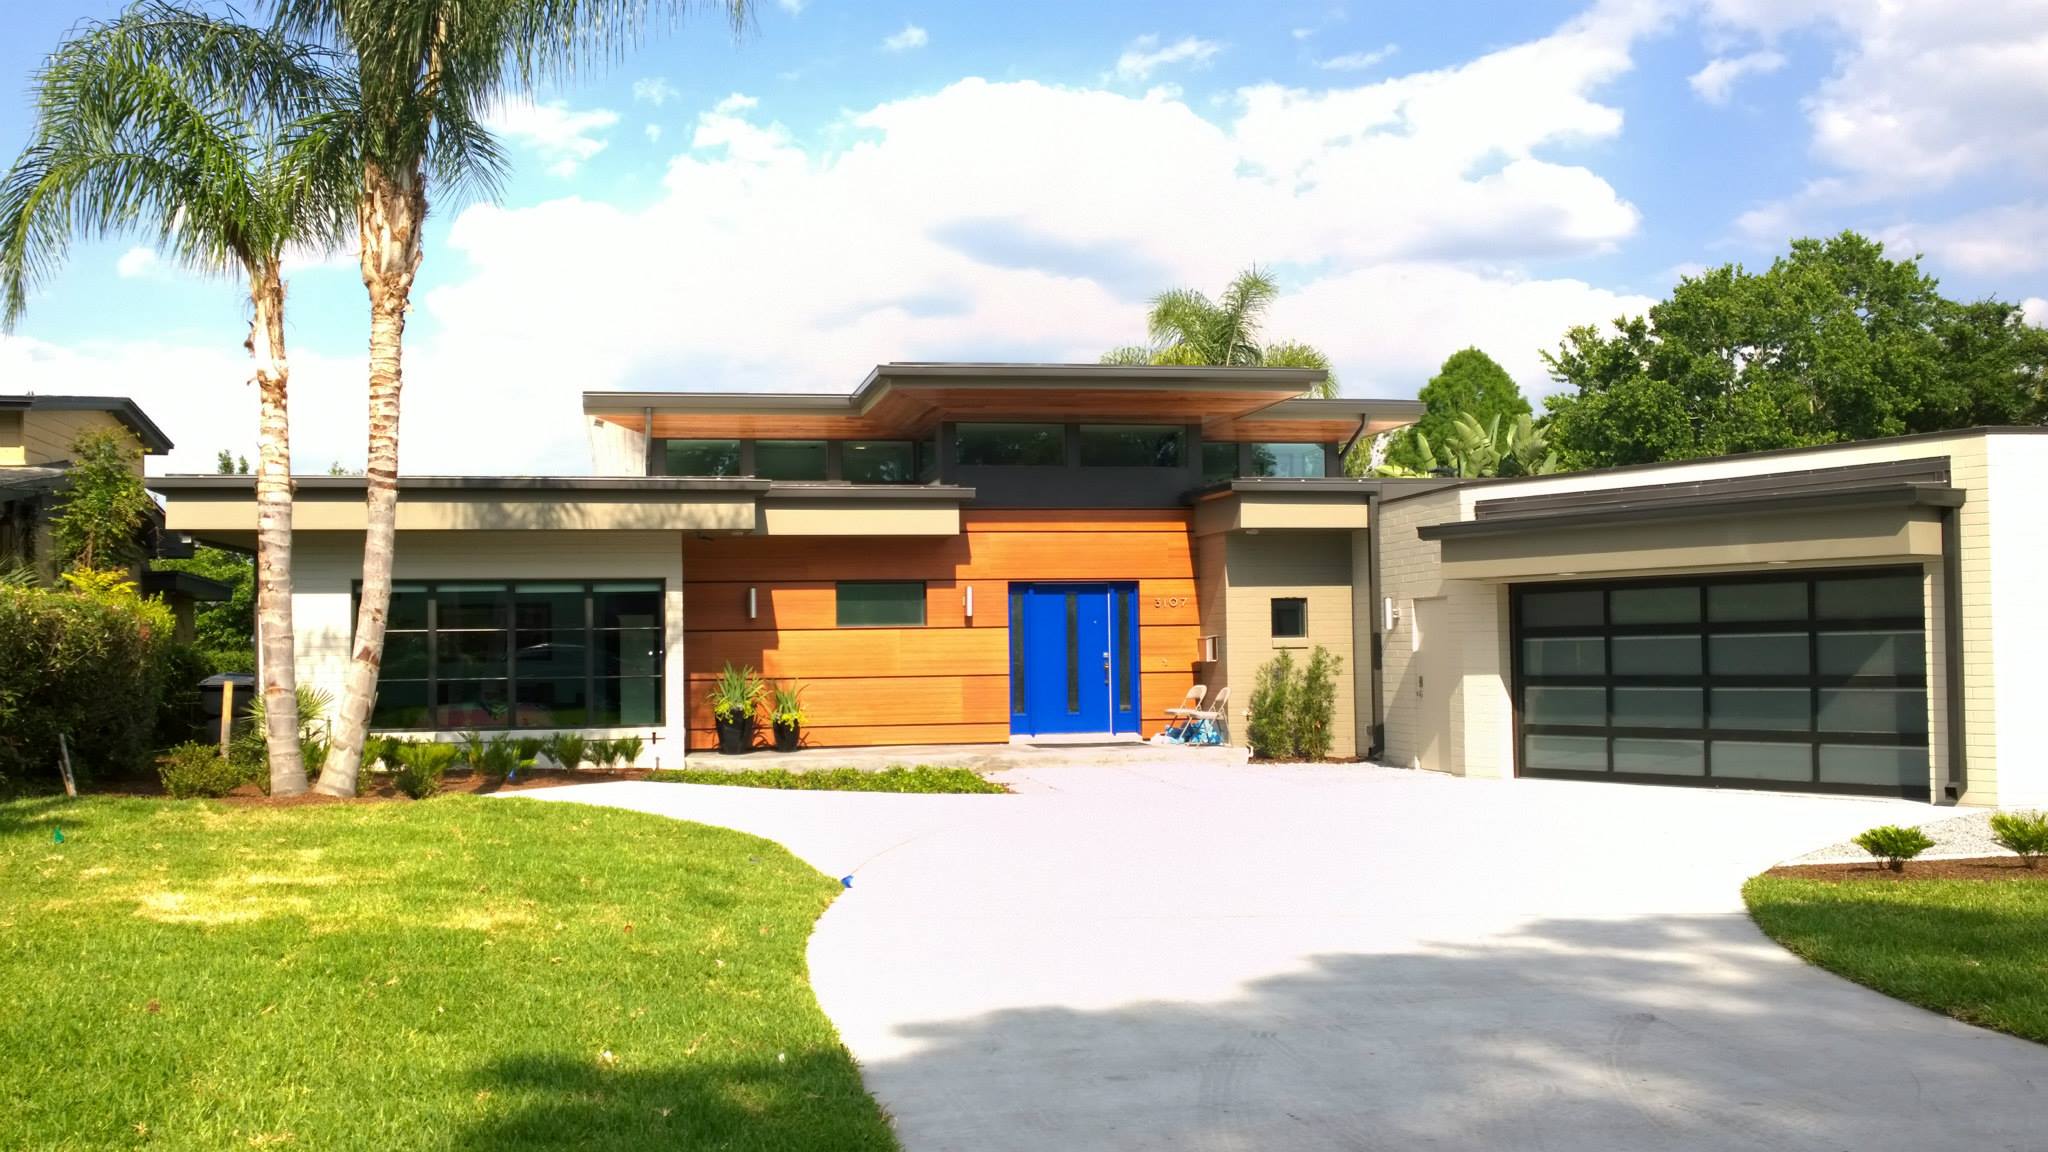 Florida Mid-Century Modern Architecture - Update and Renovation